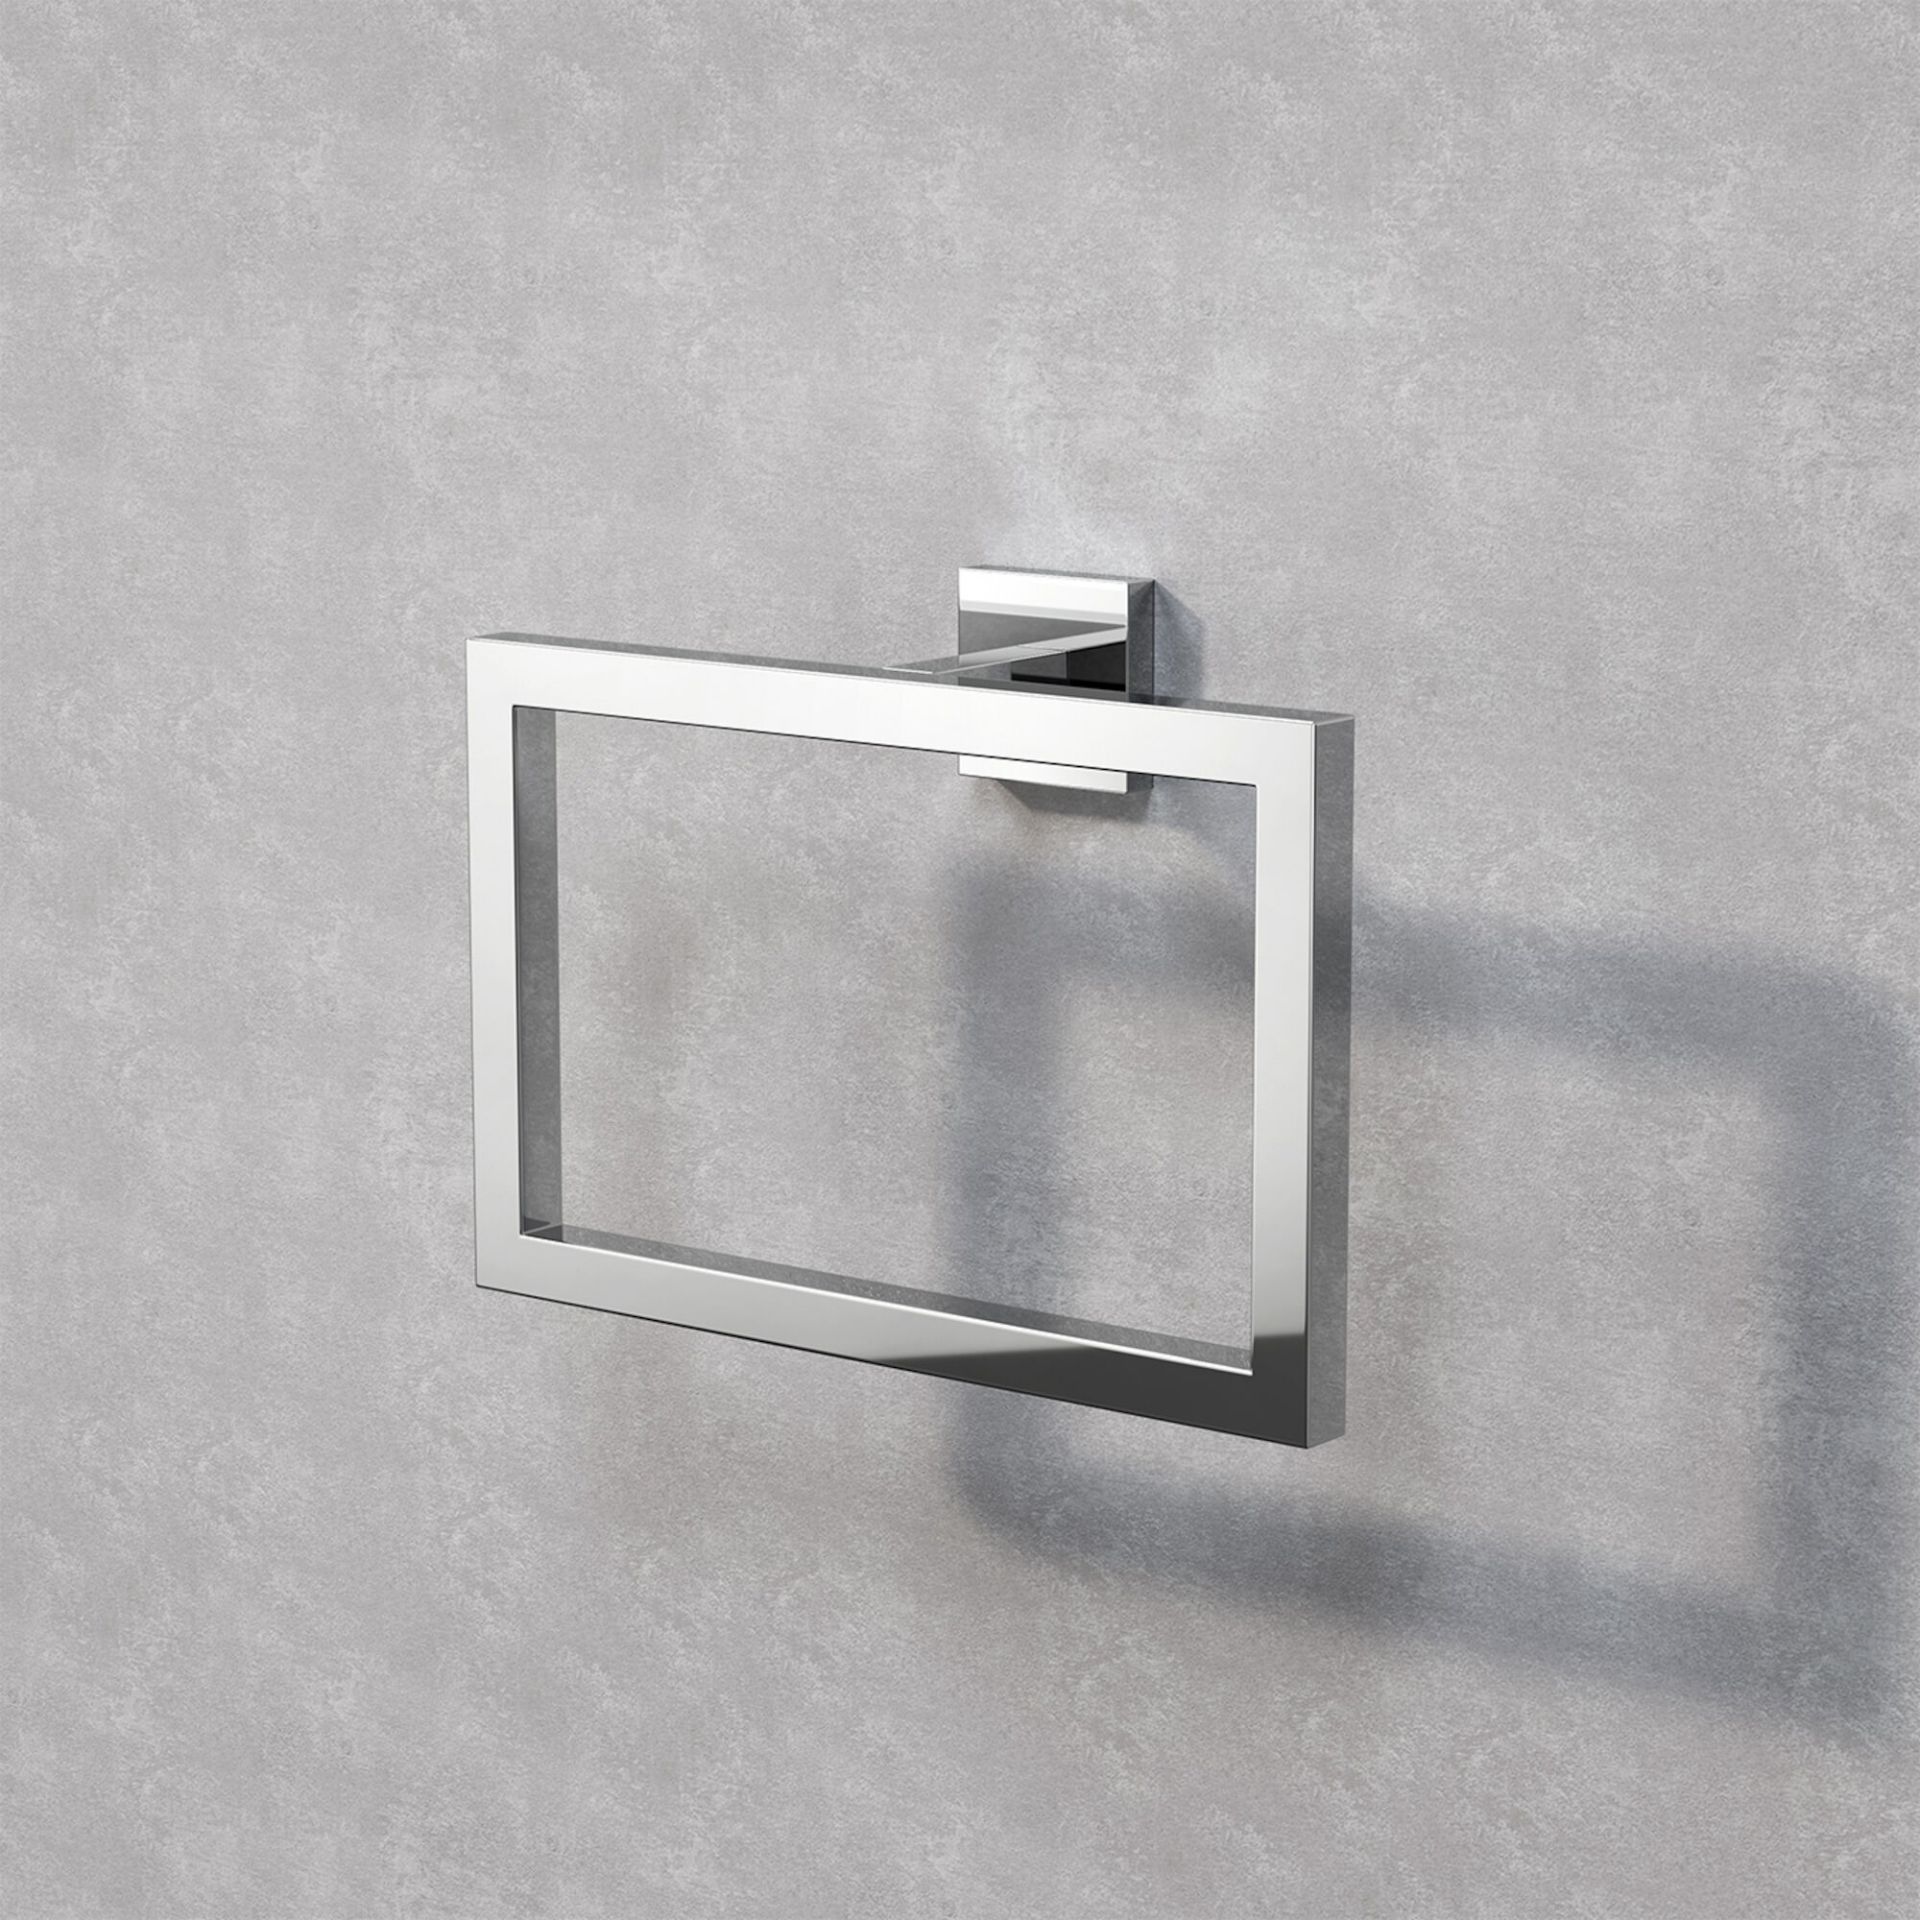 (VZ27) Jesmond Towel Ring Finishes your bathroom with a little extra functionality and style Made